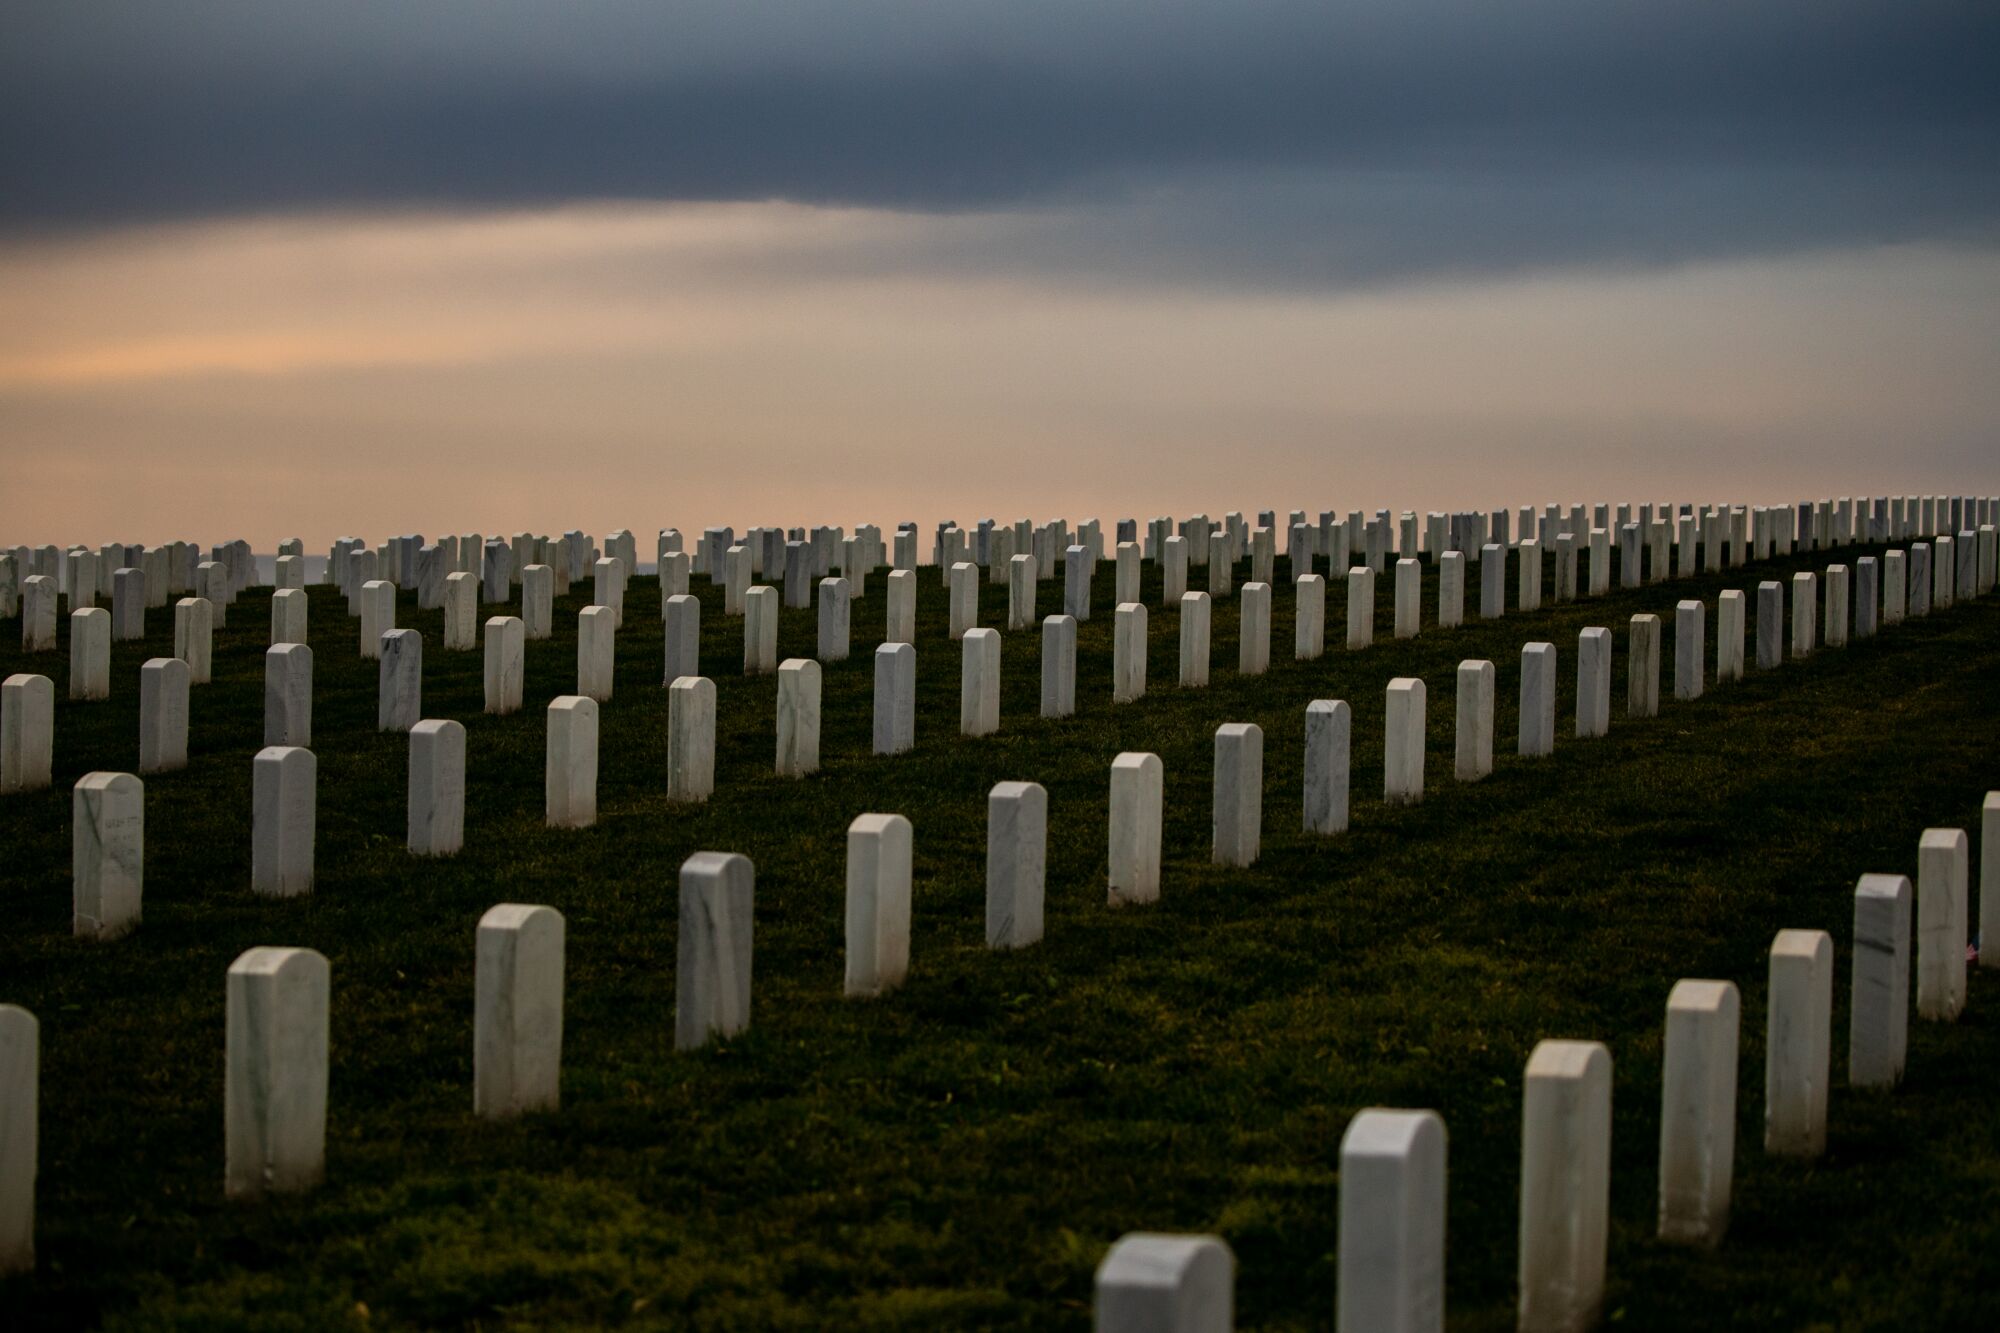 At Fort Rosecrans National Cemetery, the air is thick with the nation’s past struggles.